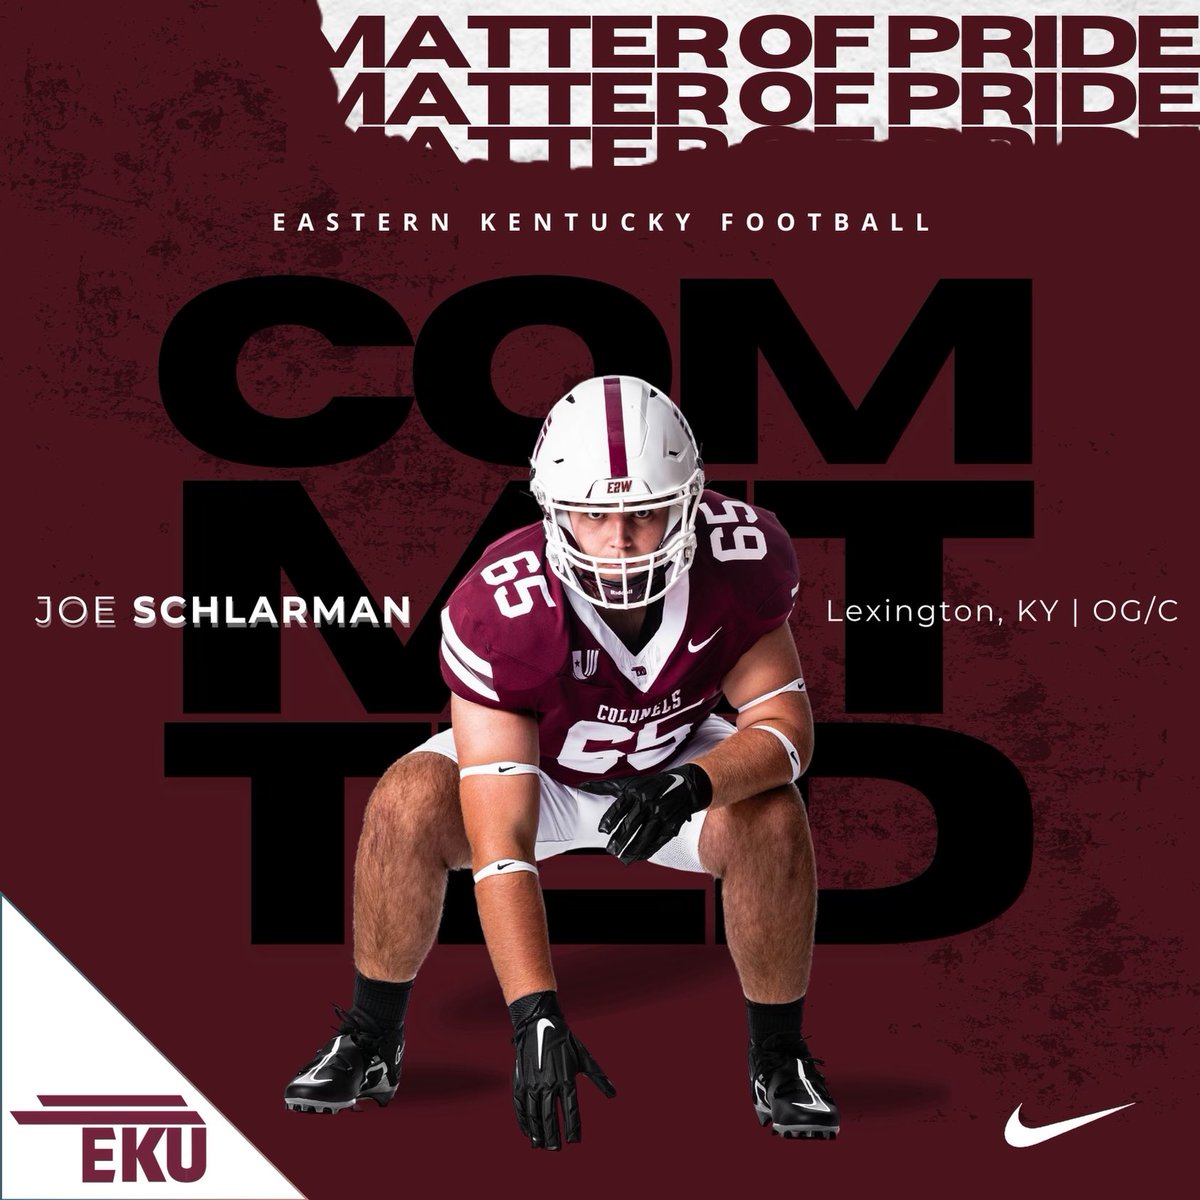 After a lot of thought and consideration, I am excited to continue my athletic and academic career at Eastern Kentucky University! #gocolonels #MatterOfPride @EKUWWells @Erik_Losey @EKUFootball @coacharichman @N_Baisch42 @LexCathFootball